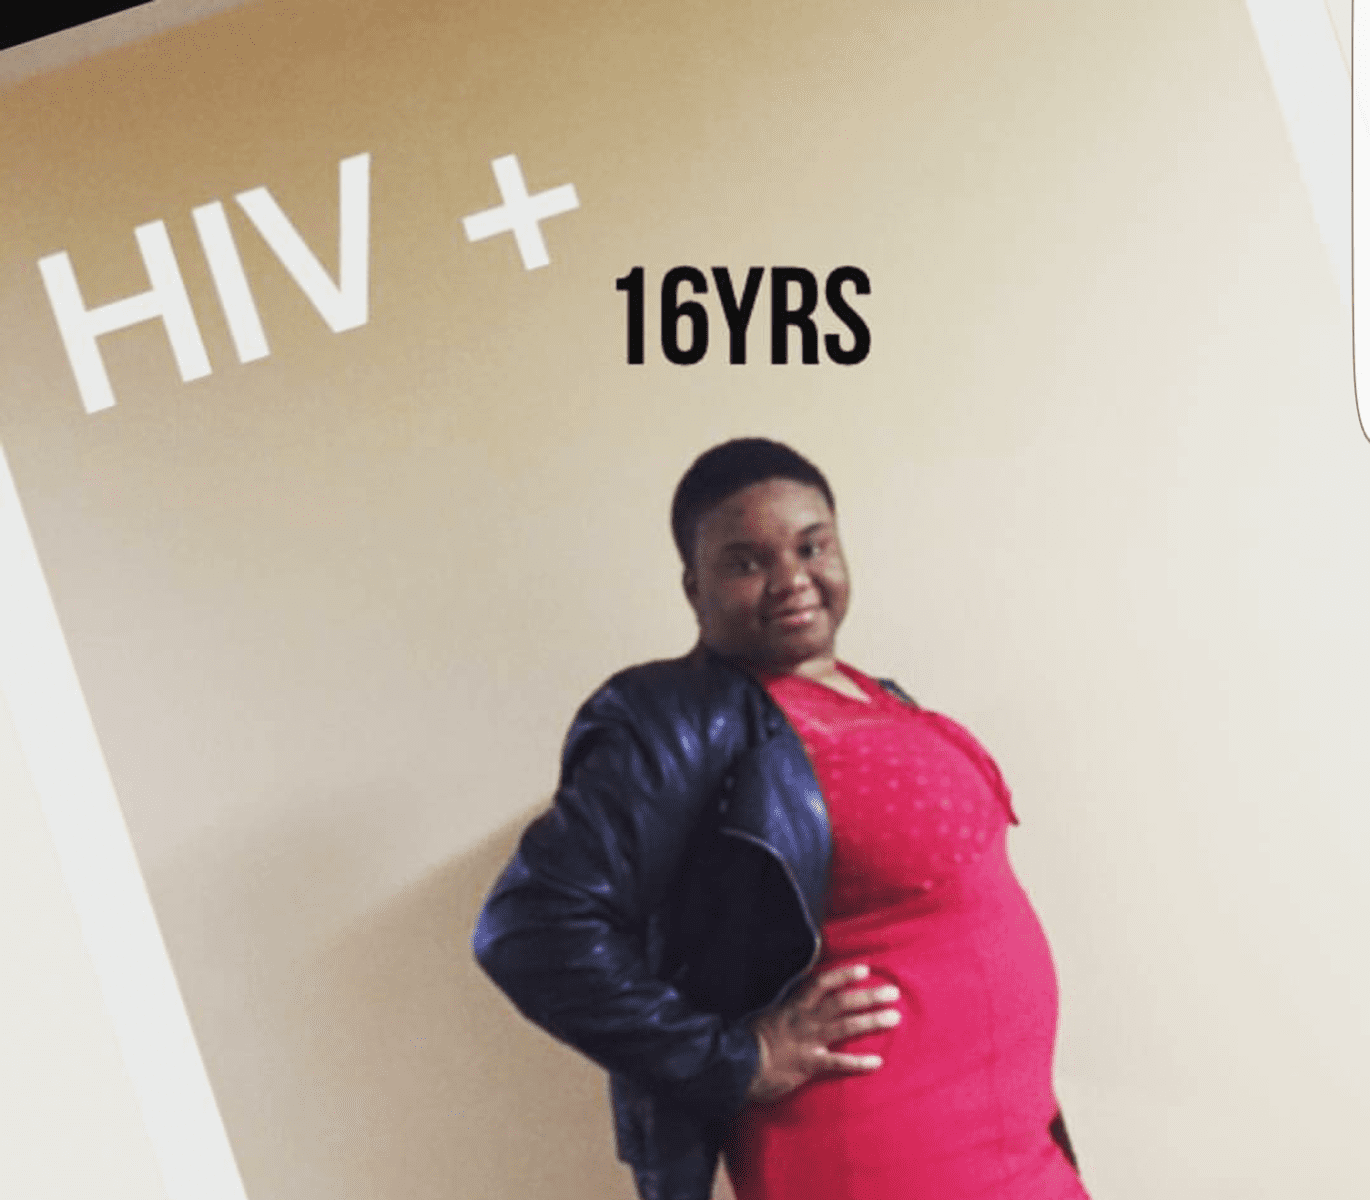 LeSherri is proud of thriving with HIV for 16 years